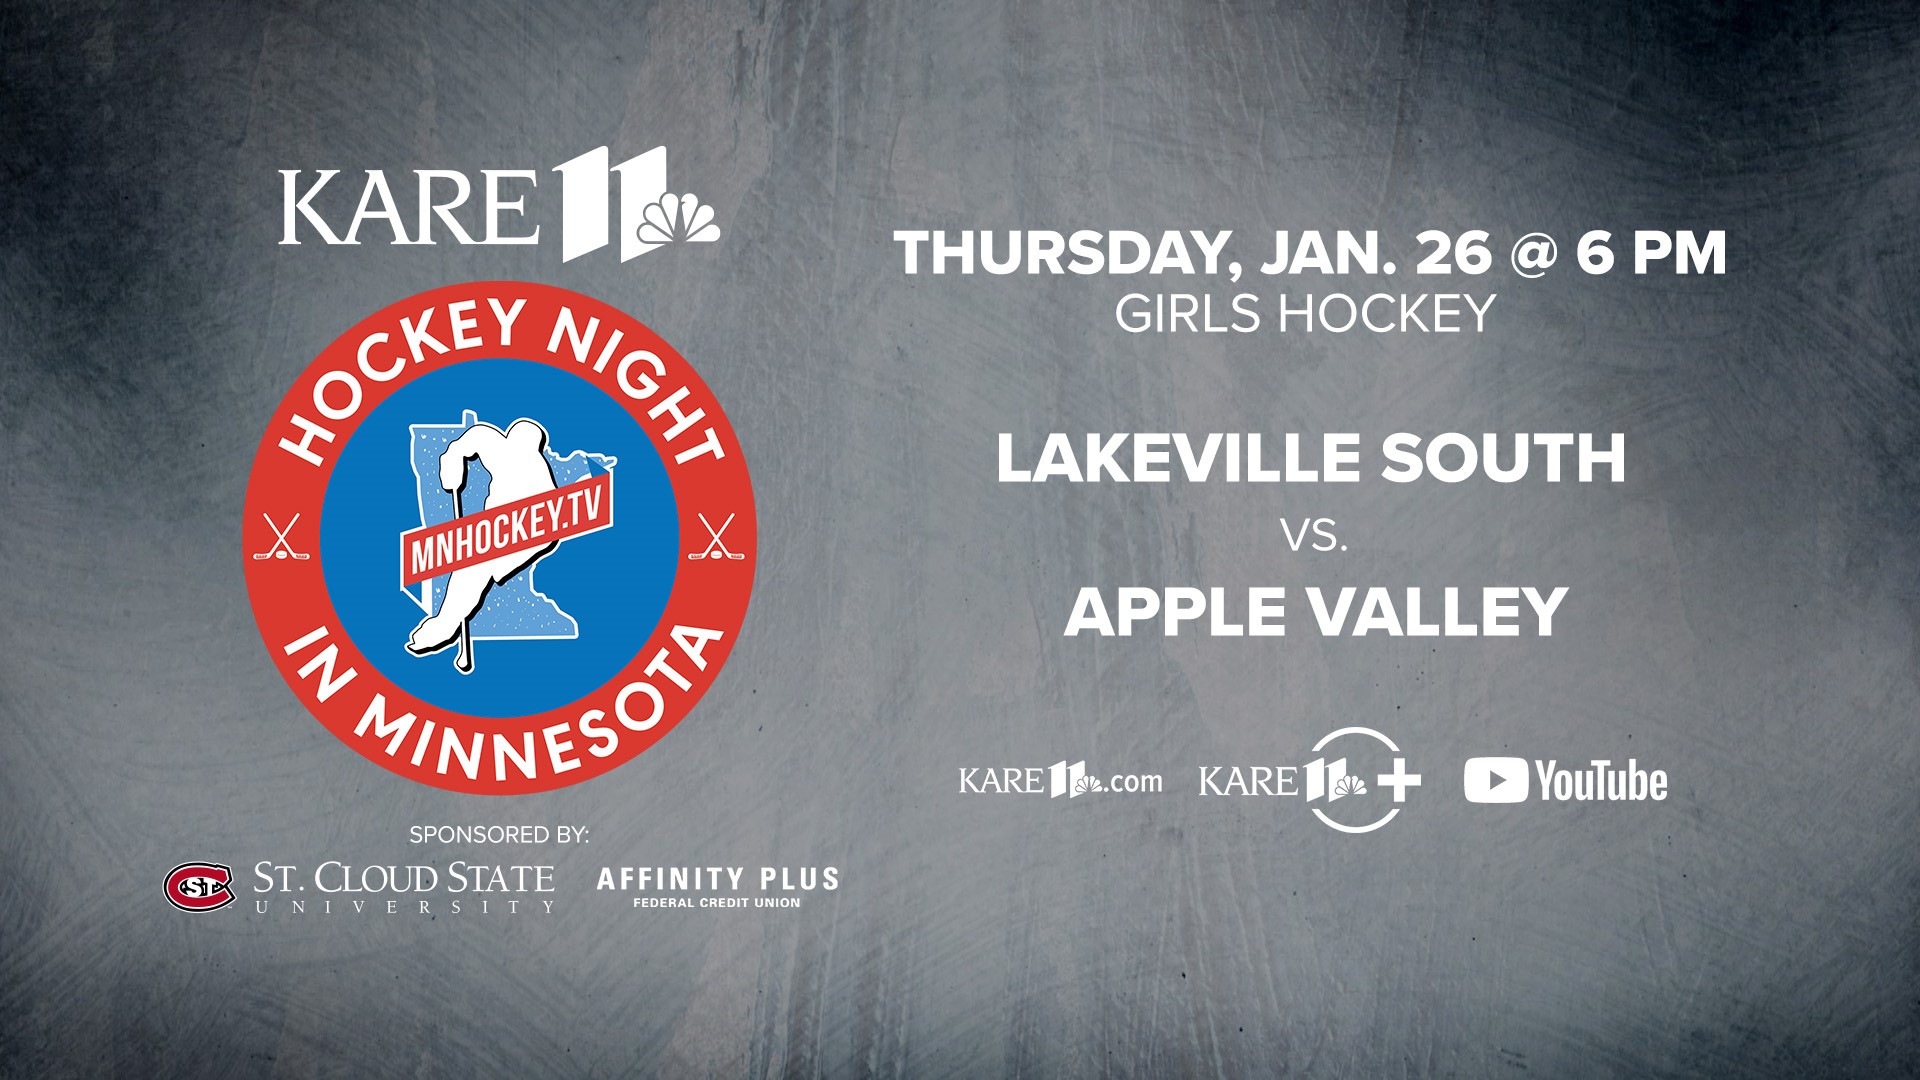 The Lakeville South and Apple Valley girls hockey teams face off in Jan. 26's hockey stream.